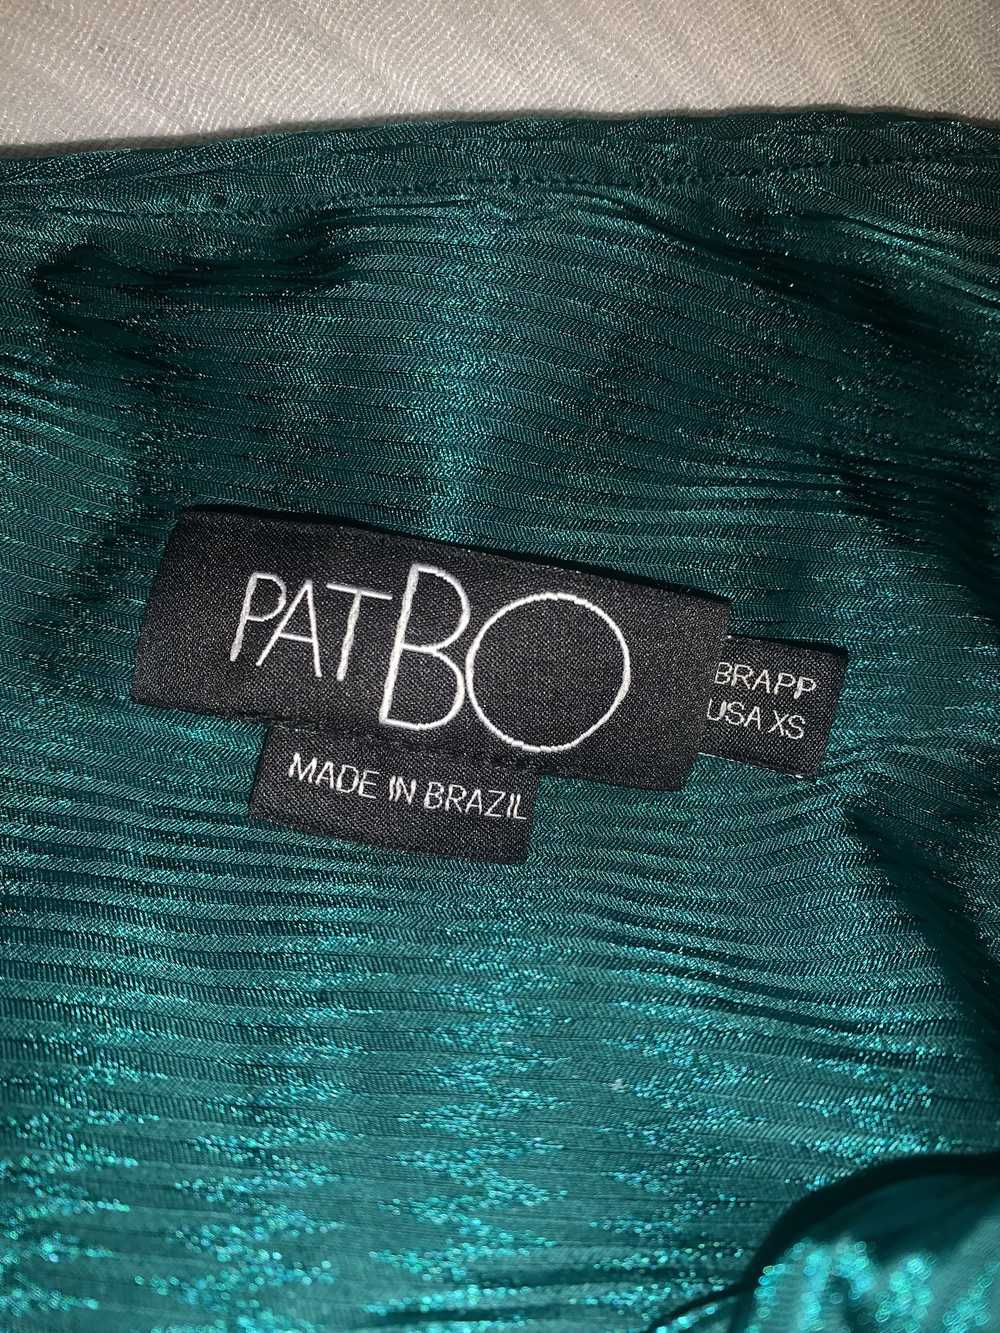 Patbo PatBO One Shoulder Netted Beach Dress - image 5